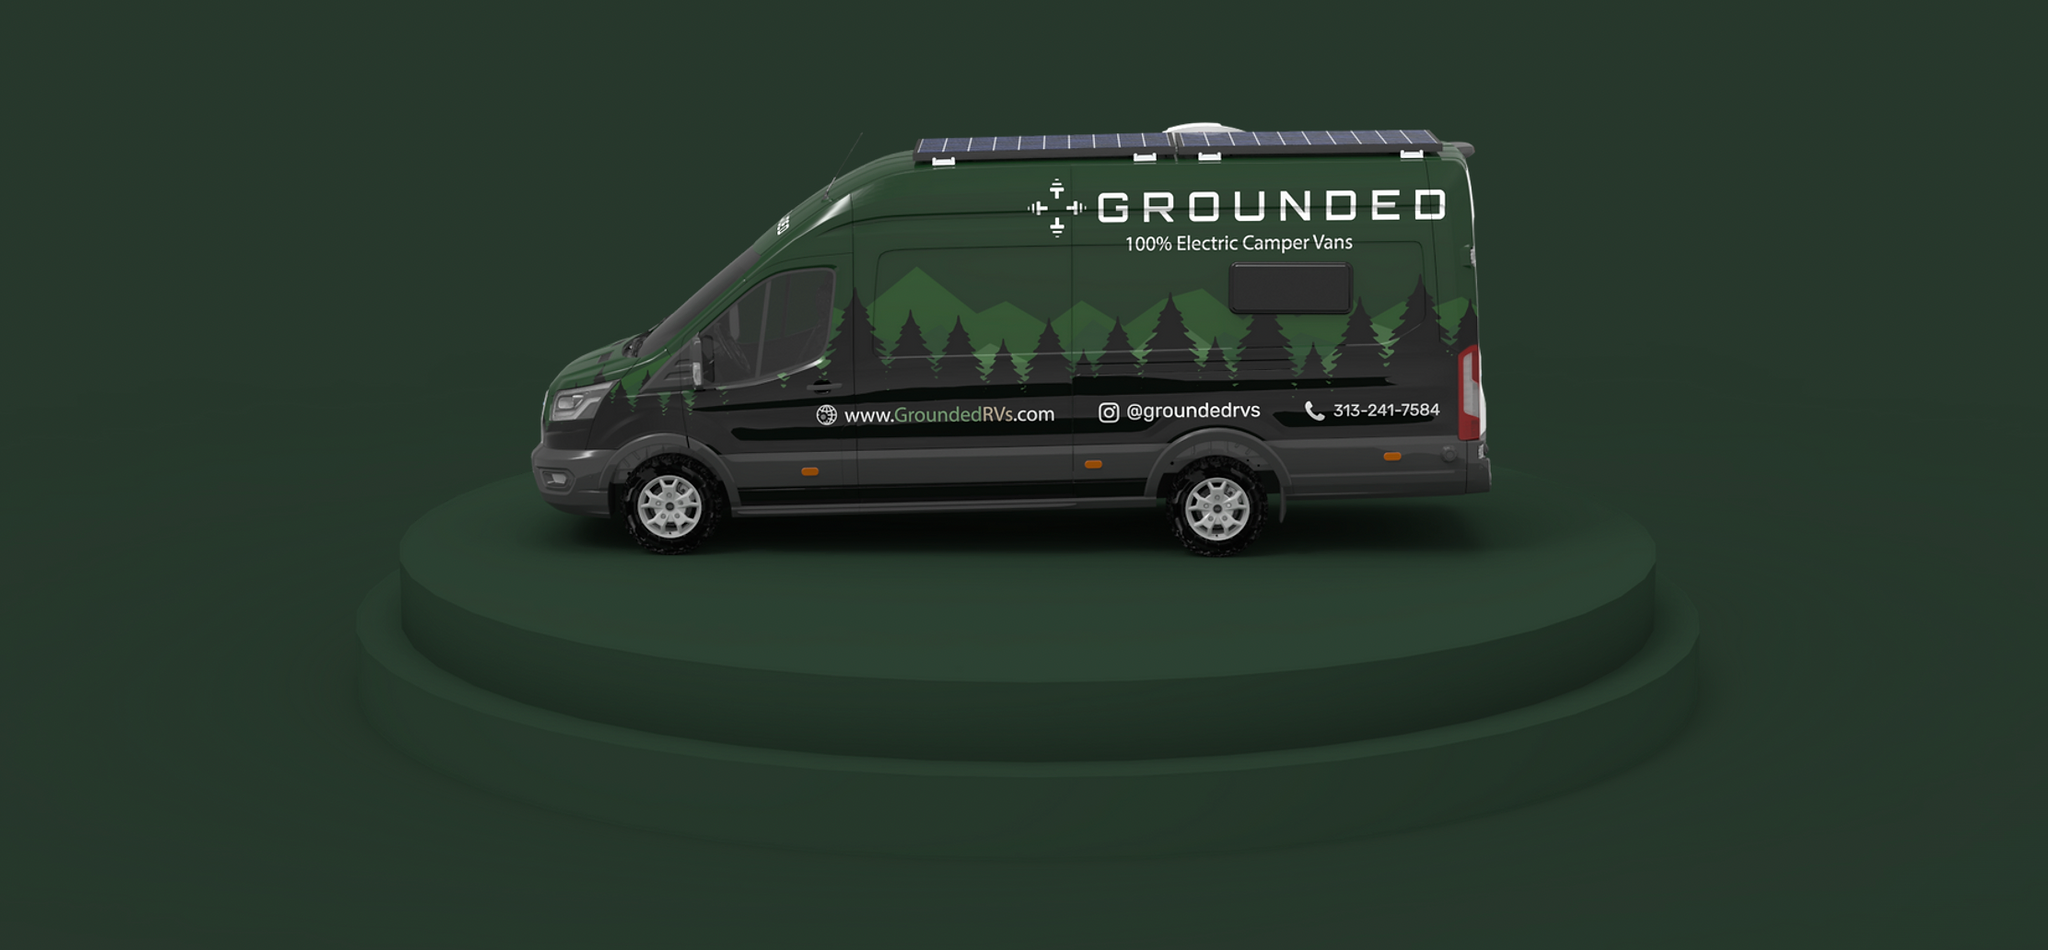 Grounded: the smart RV transforming van life